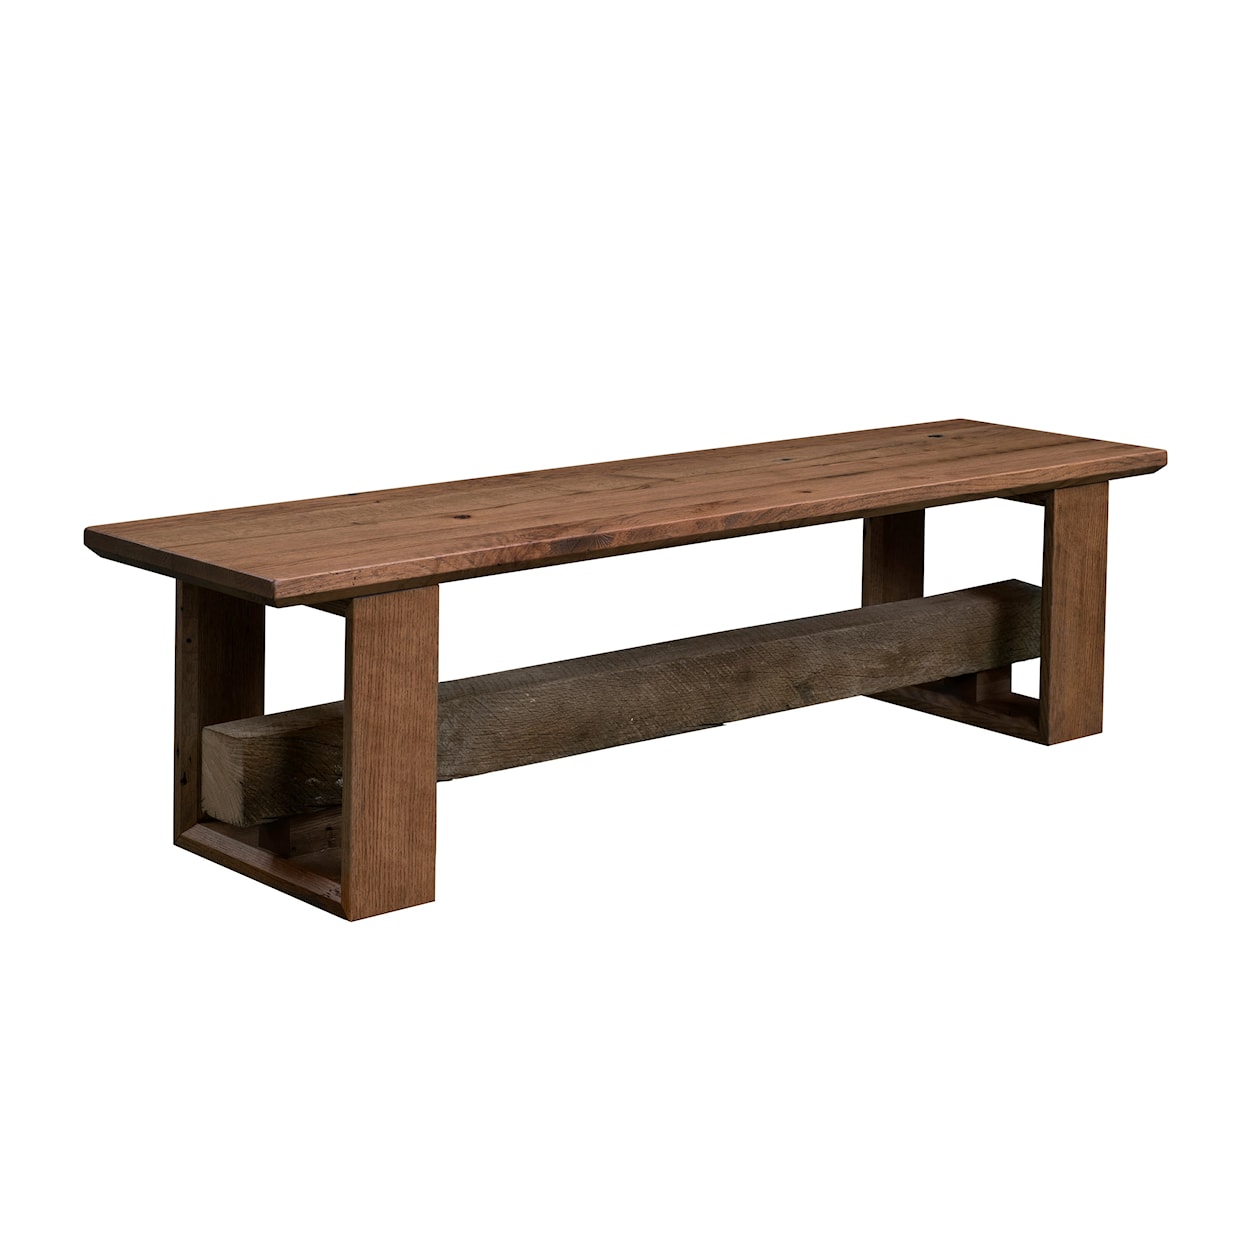 Urban Barnwood Furniture 1869 Dining 72" Accent Bench